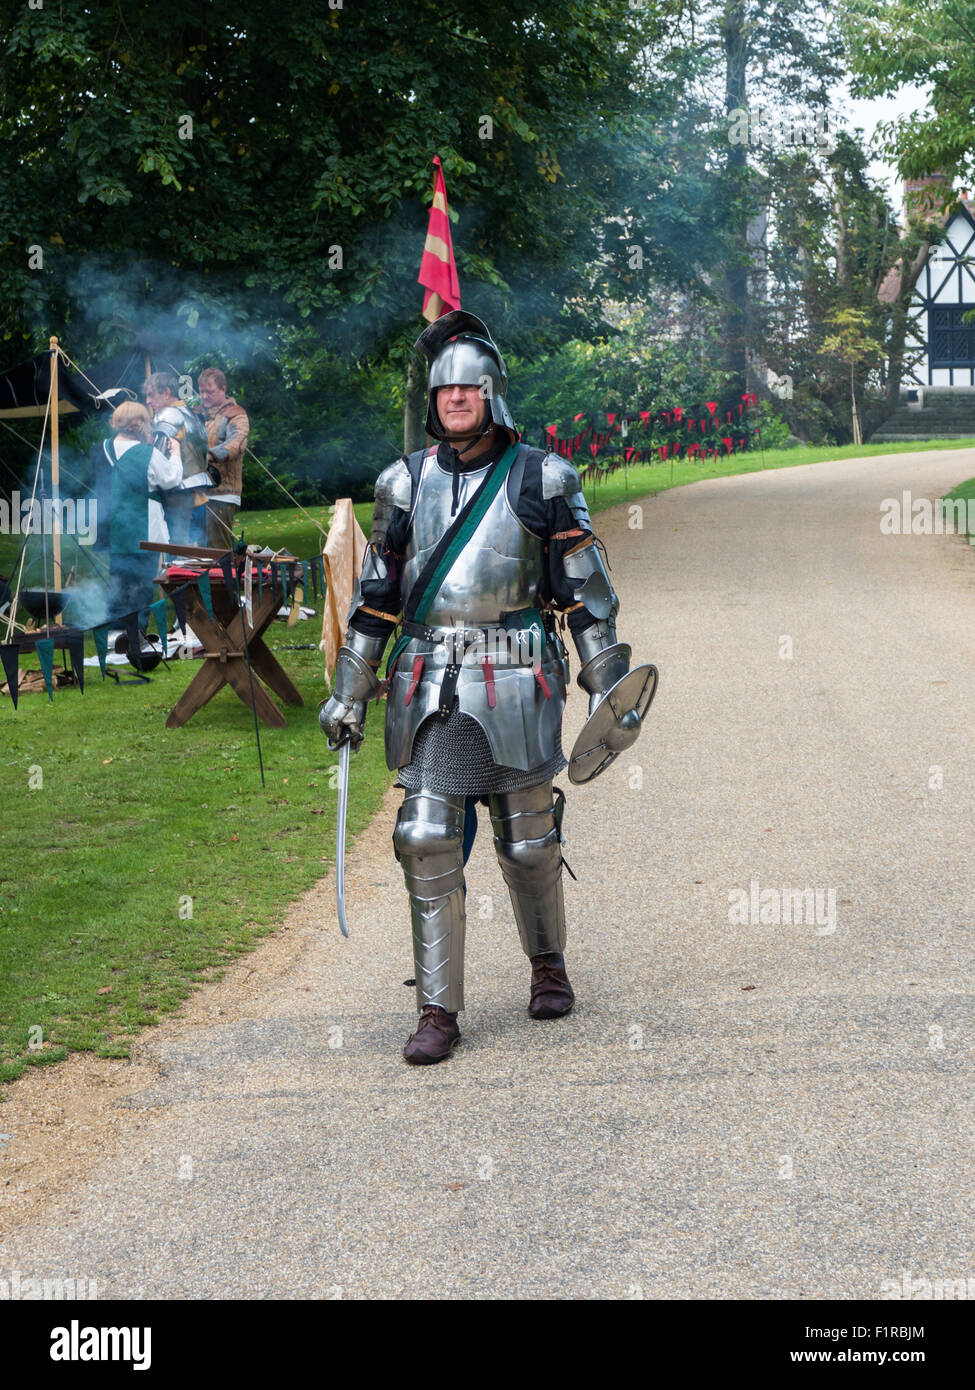 A knight in shining armor prepares for a tournament Stock Photo